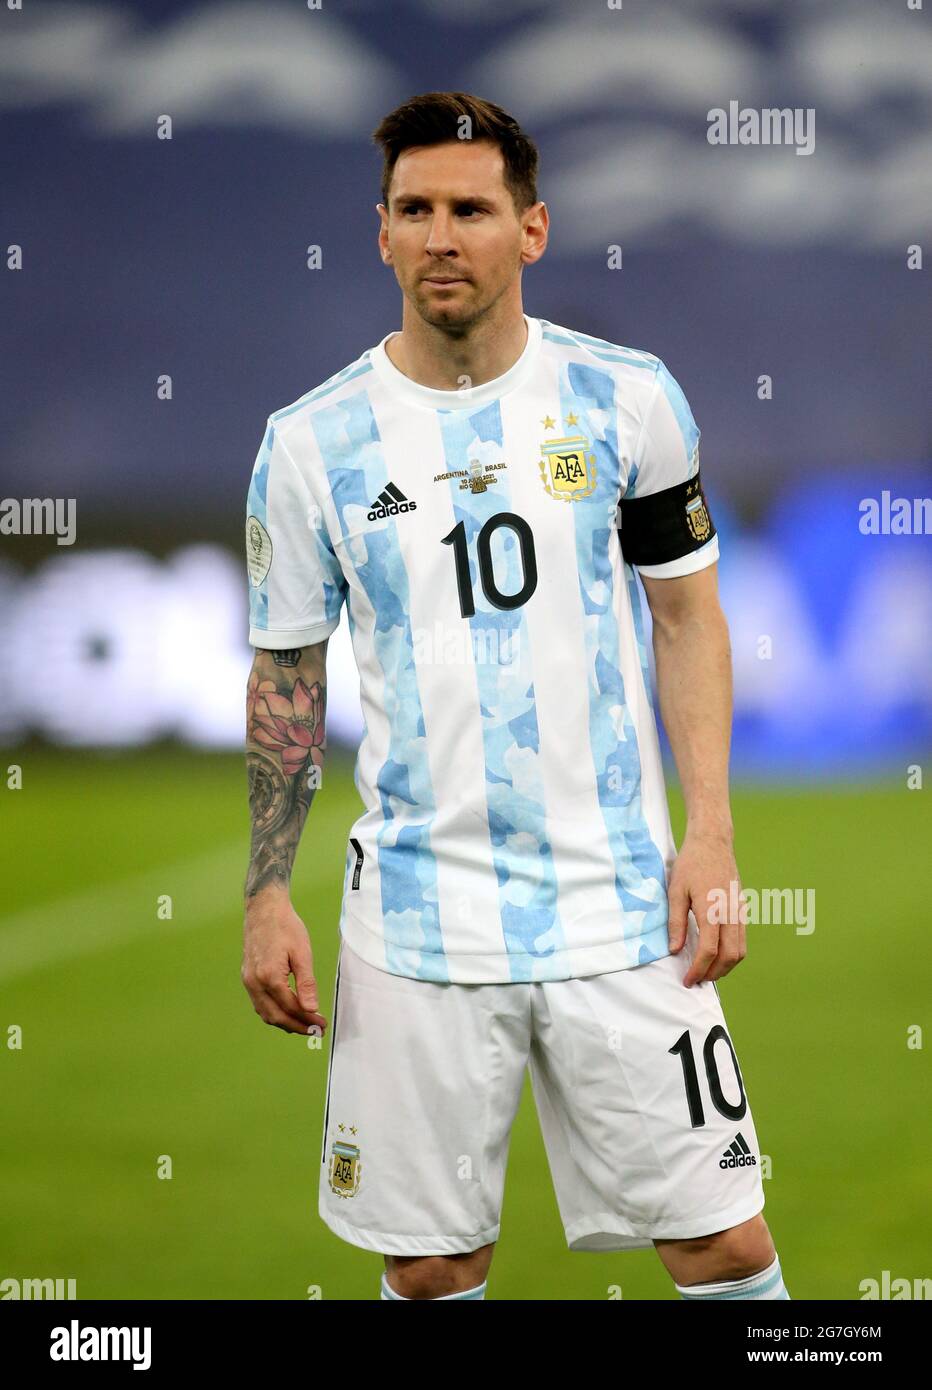 RIO DE JANEIRO, BRAZIL - JULY 10: Lionel Messi of Argentina looks on ,during the Final Match between Brazil and Argentina at Maracana Stadium on July 10, 2021 in Rio de Janeiro, Brazil. (MB Media) Stock Photo